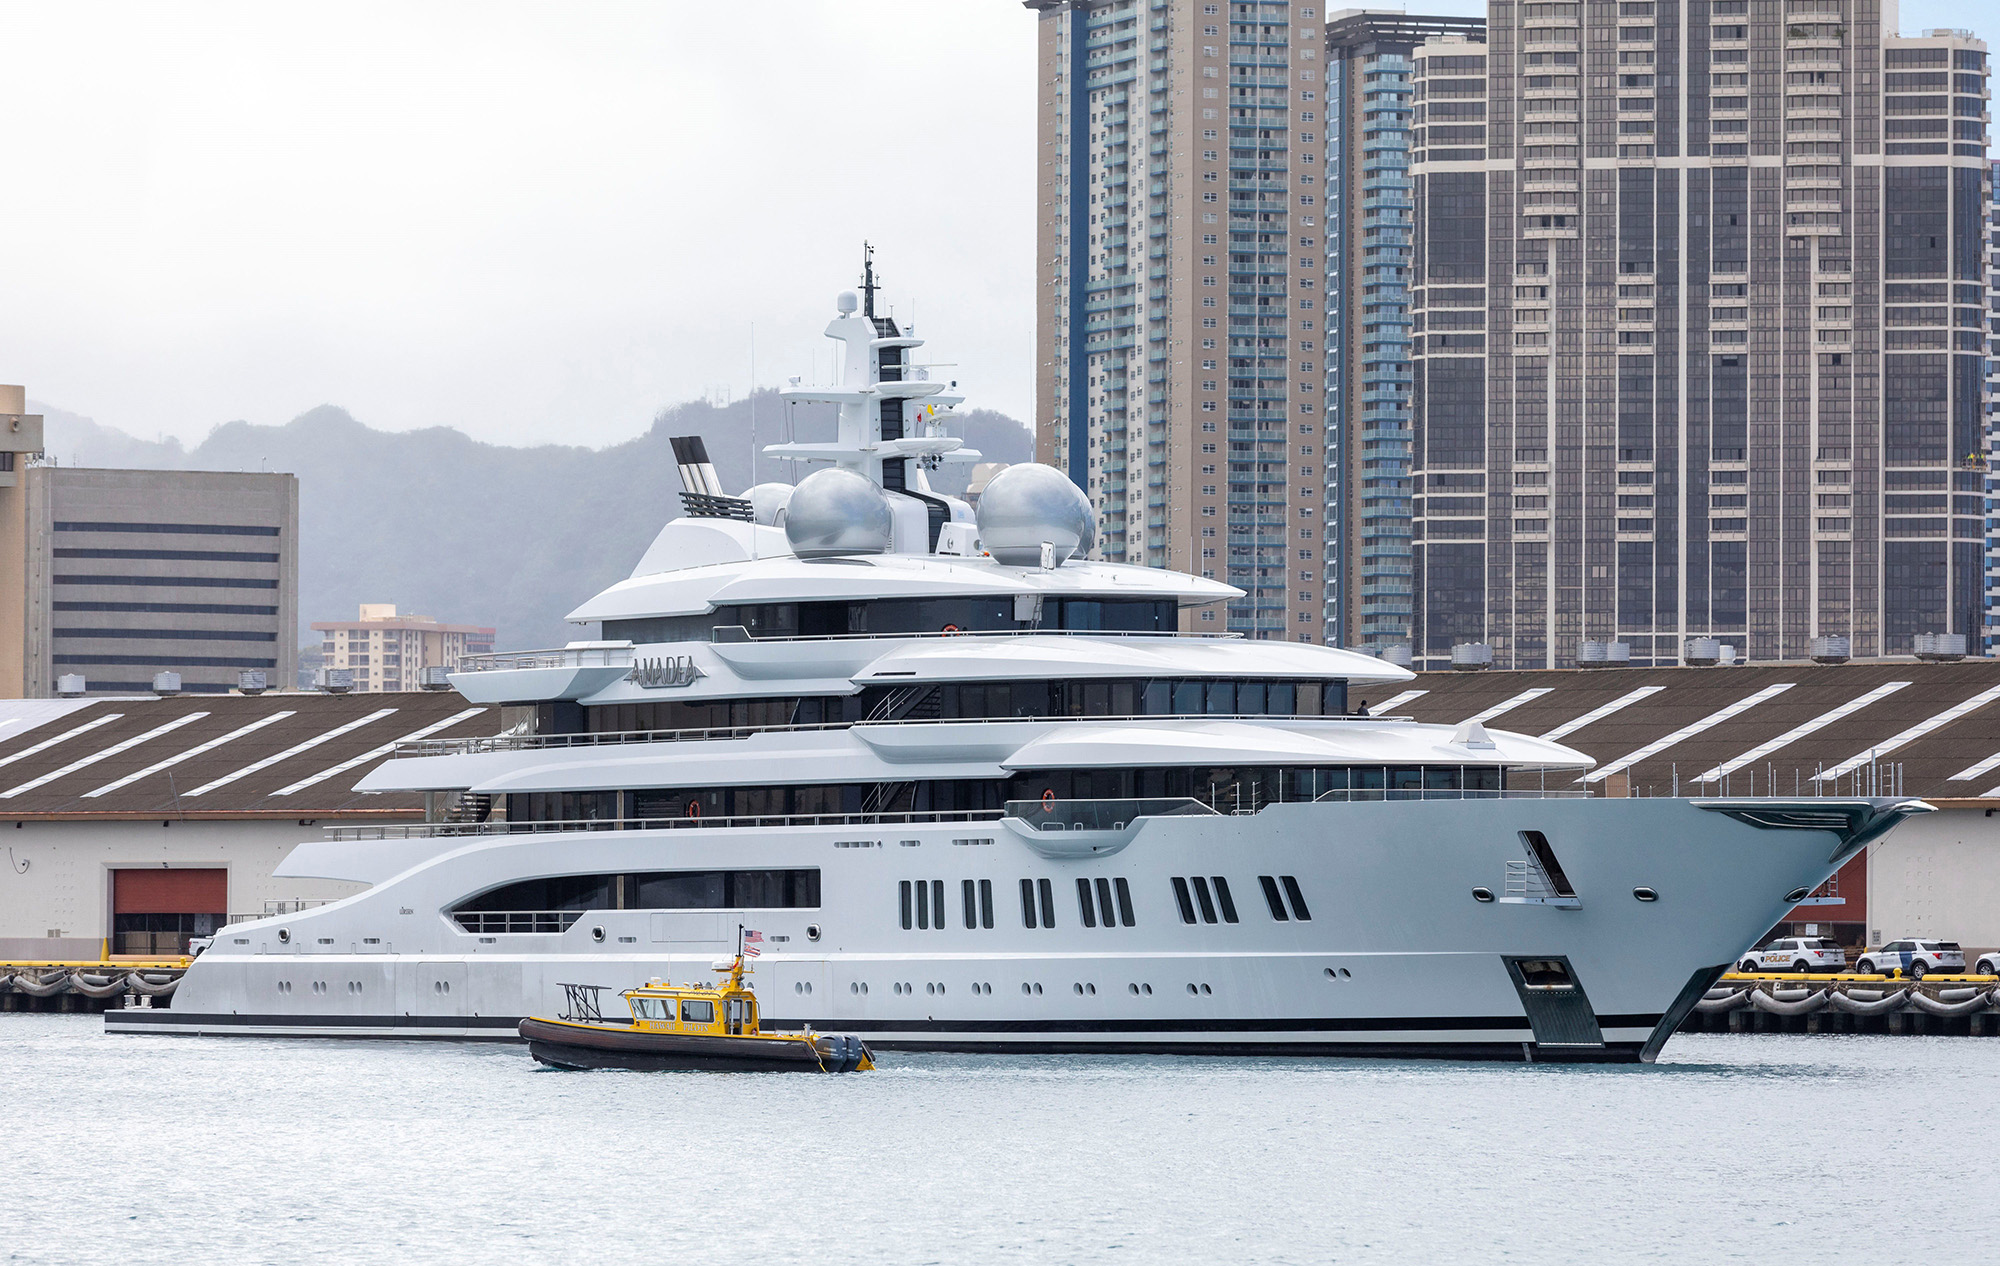 The yacht Amadea owned by the sanctioned Russian Oligarch Suleiman Kerimov arrives in Honolulu on June 16, after being seized by the Fiji government at the request of the US government.